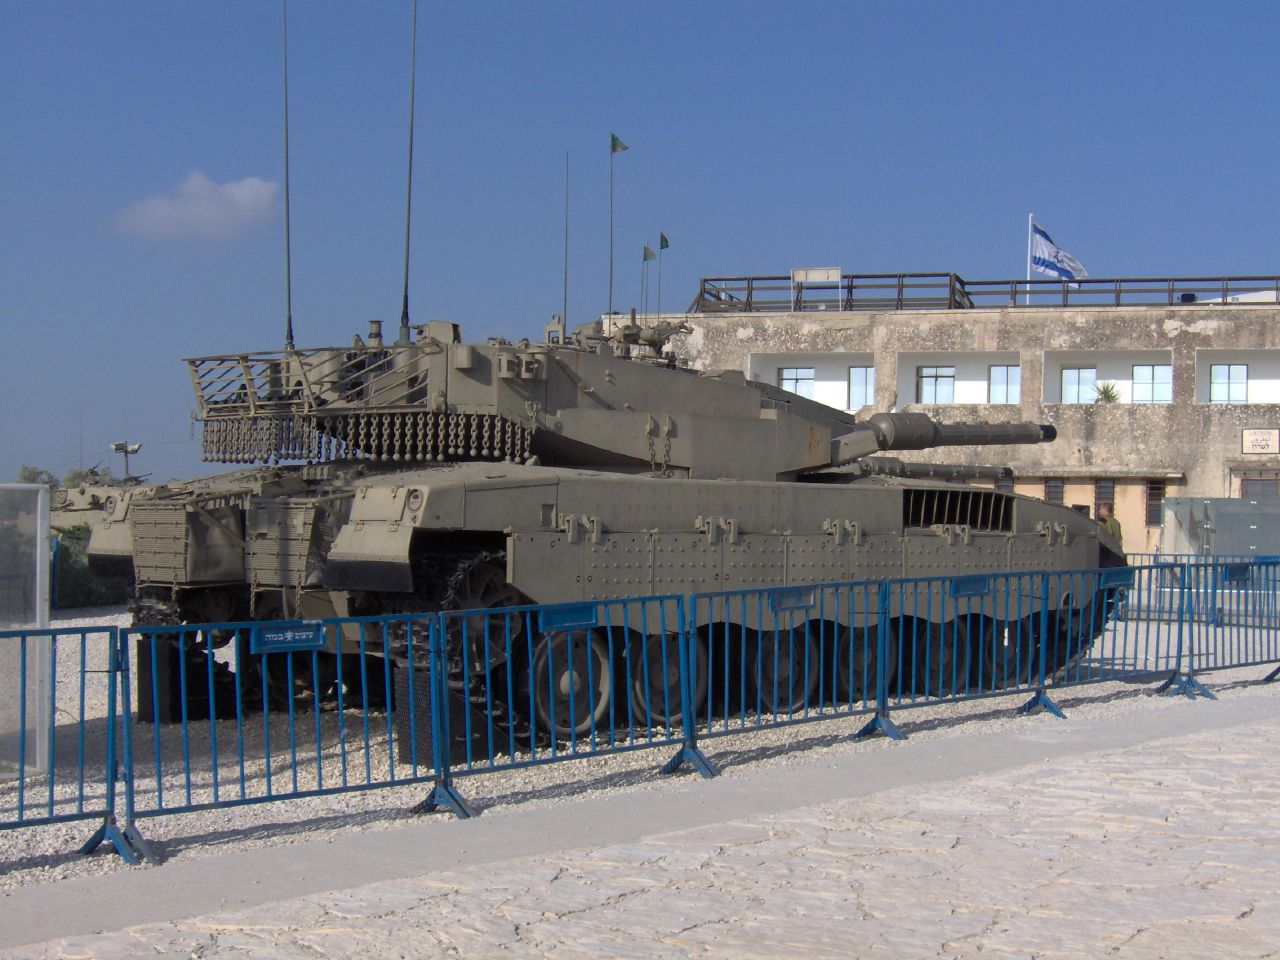 an army tank parked in the sand behind a metal fence